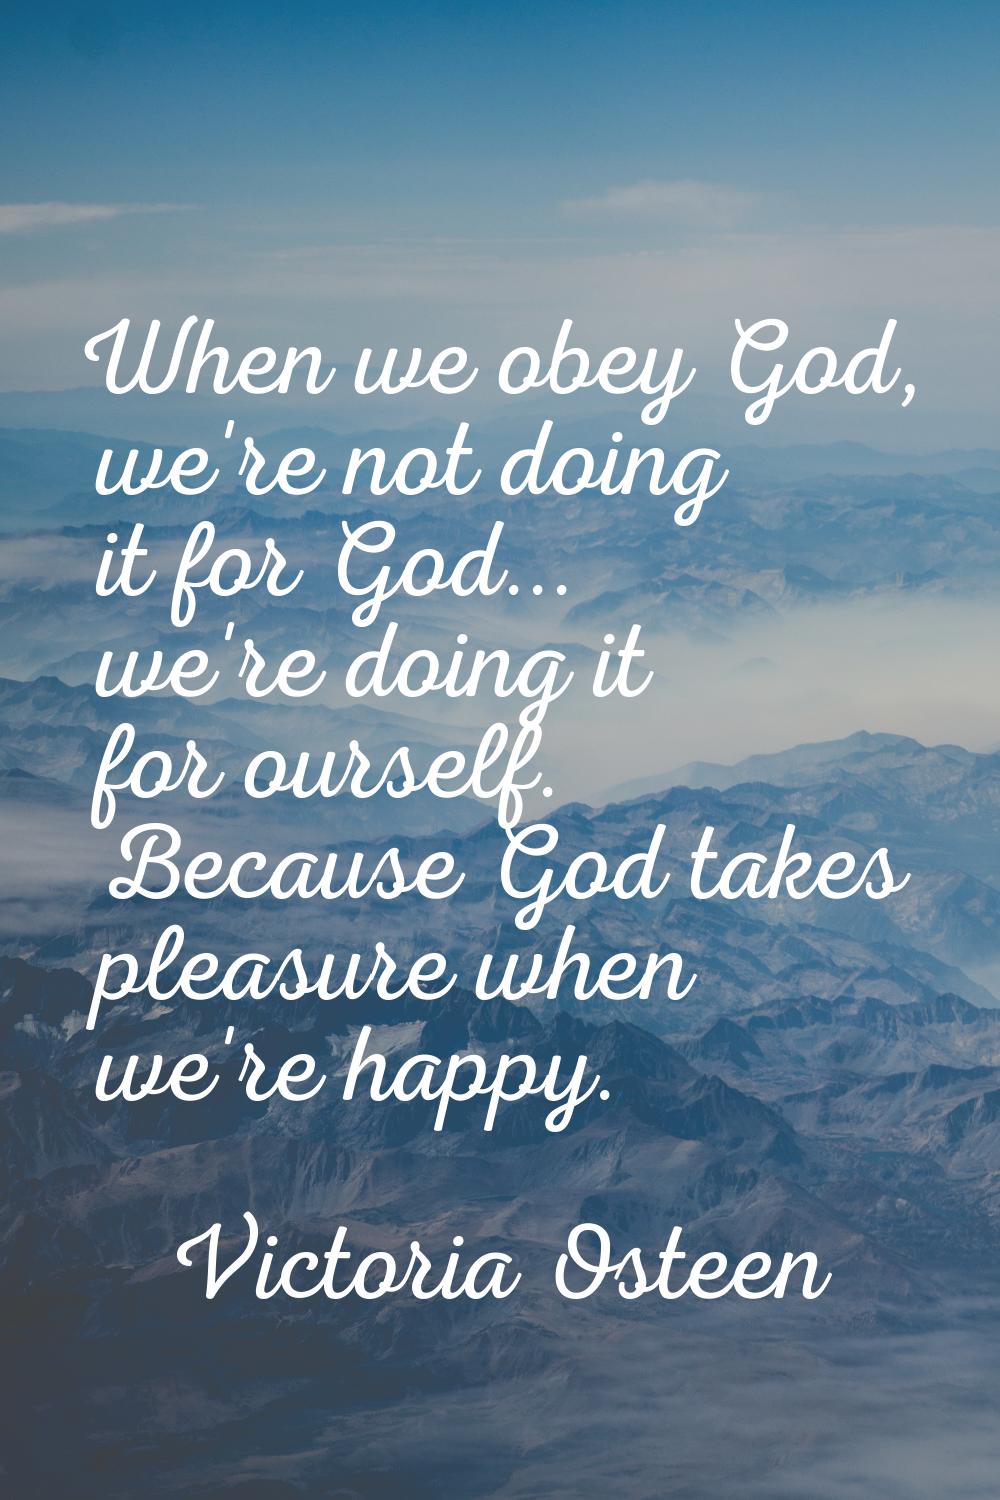 When we obey God, we're not doing it for God... we're doing it for ourself. Because God takes pleas